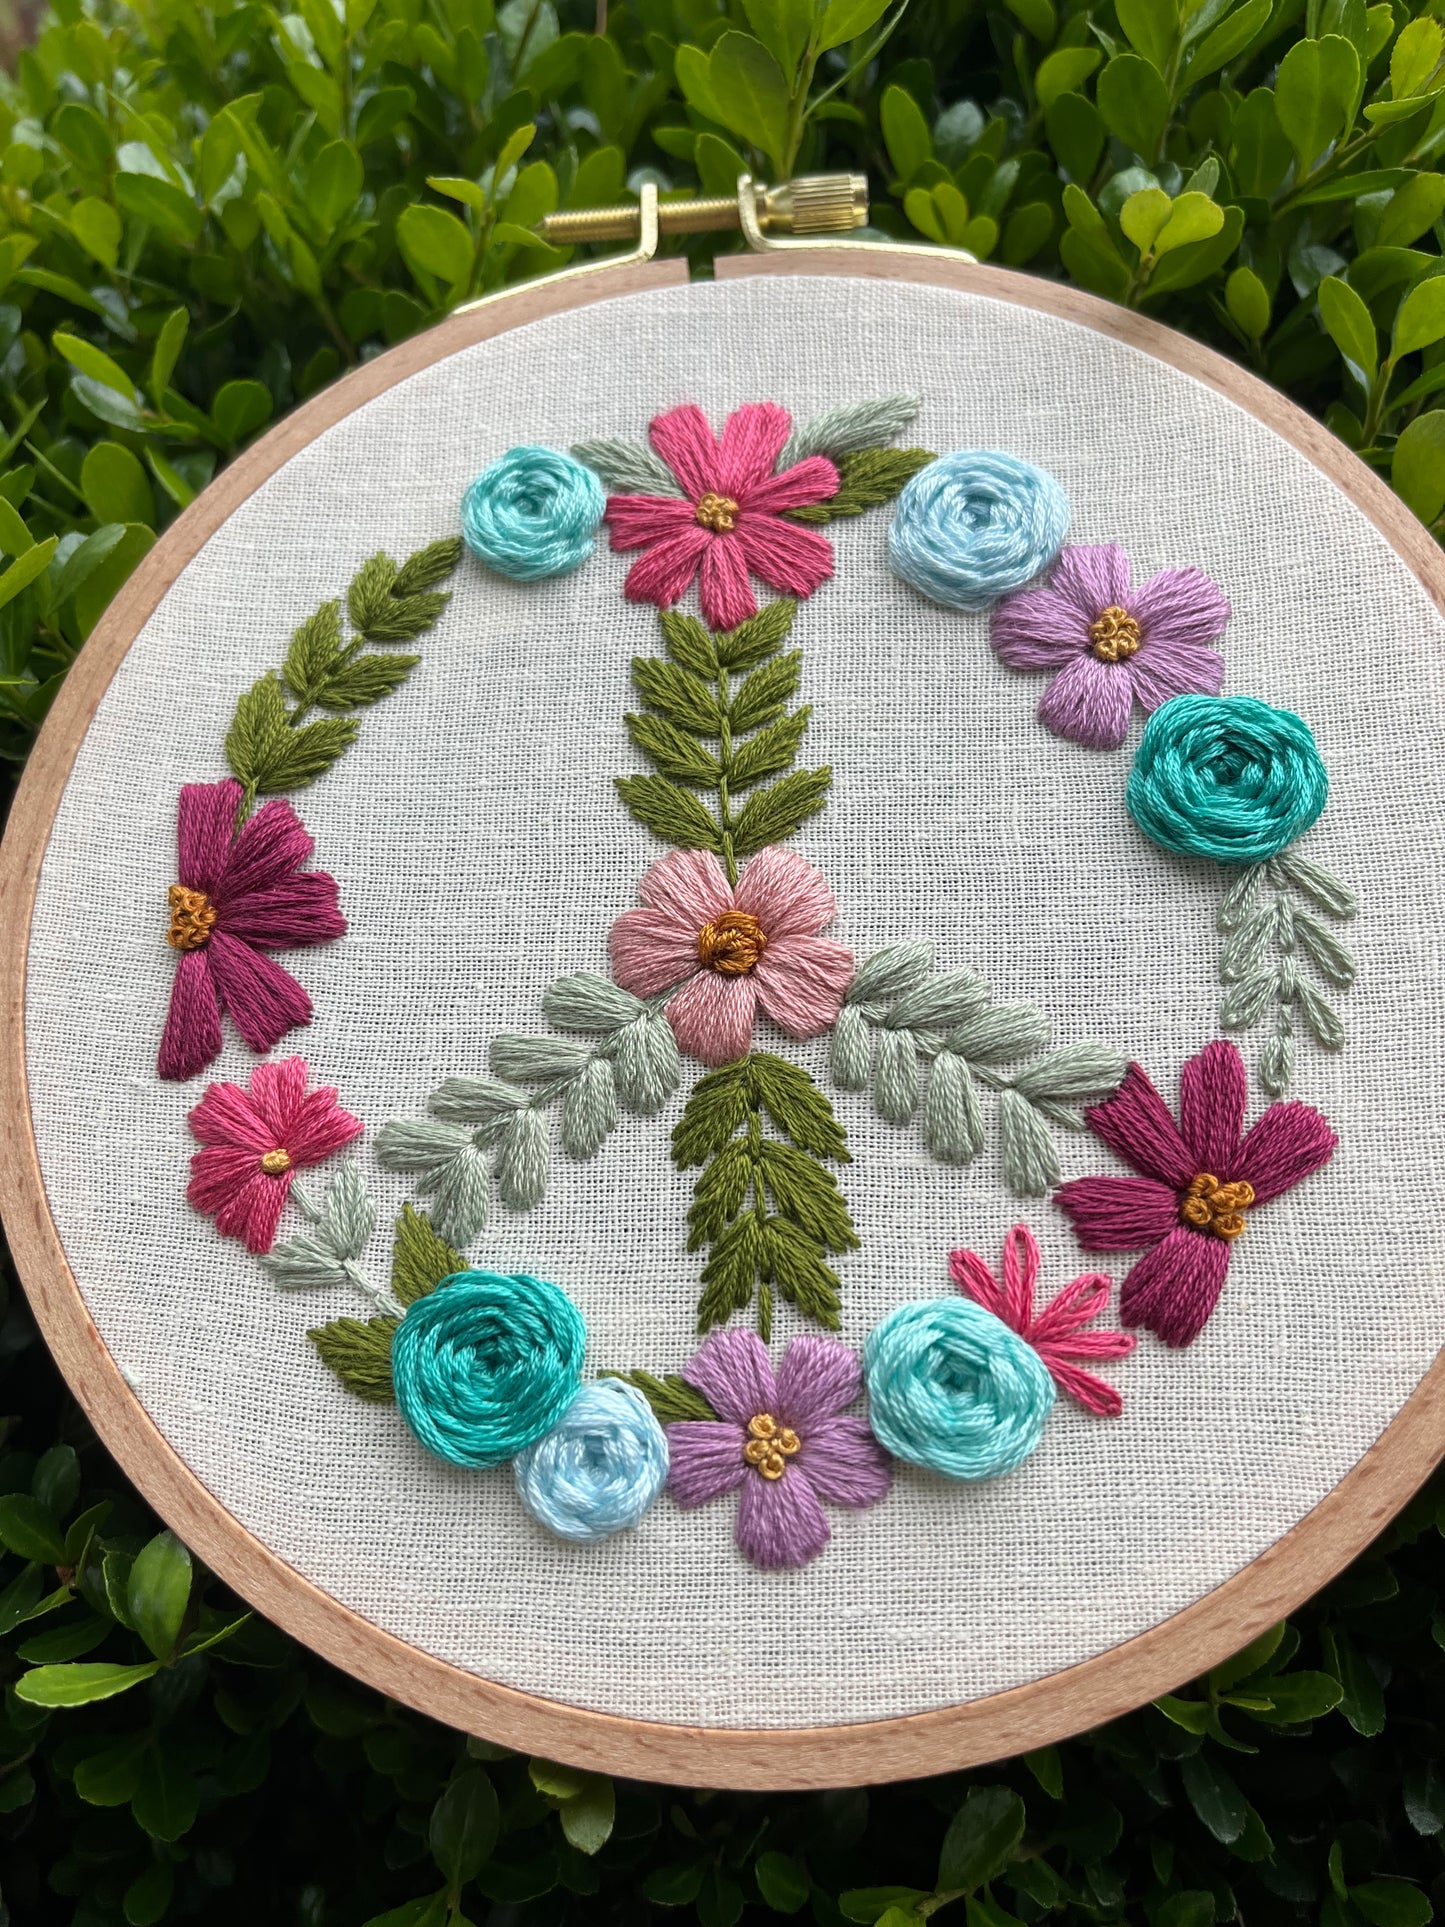 PDF Pattern - Peaceful Petals, Beginner/Intermediate Floral Peace Sign Symbol Hand Embroidery Pattern